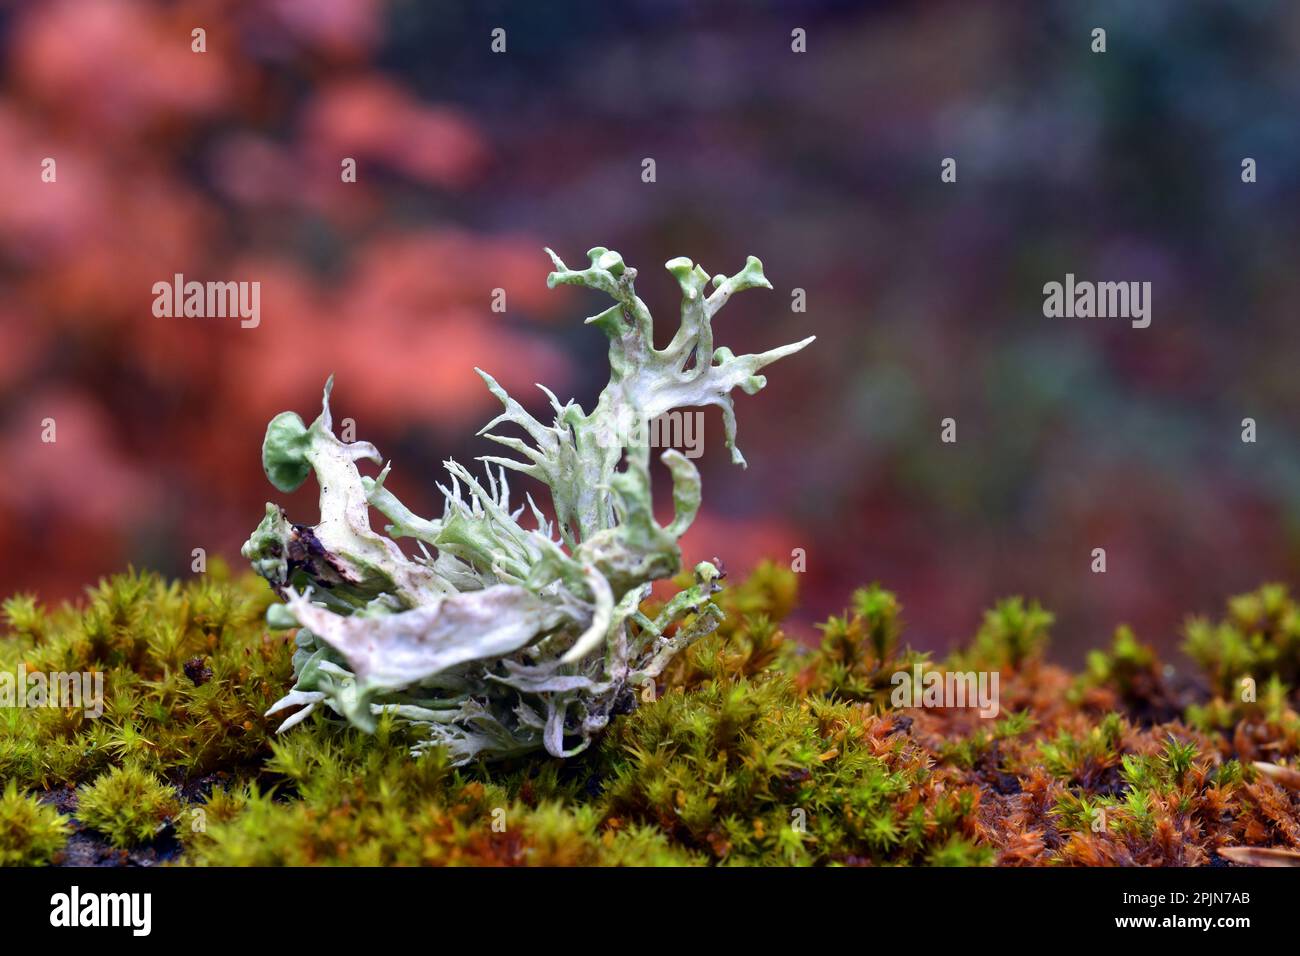 The fruticulous lichen Ramalina farinacea on a branch in a beech forest Stock Photo